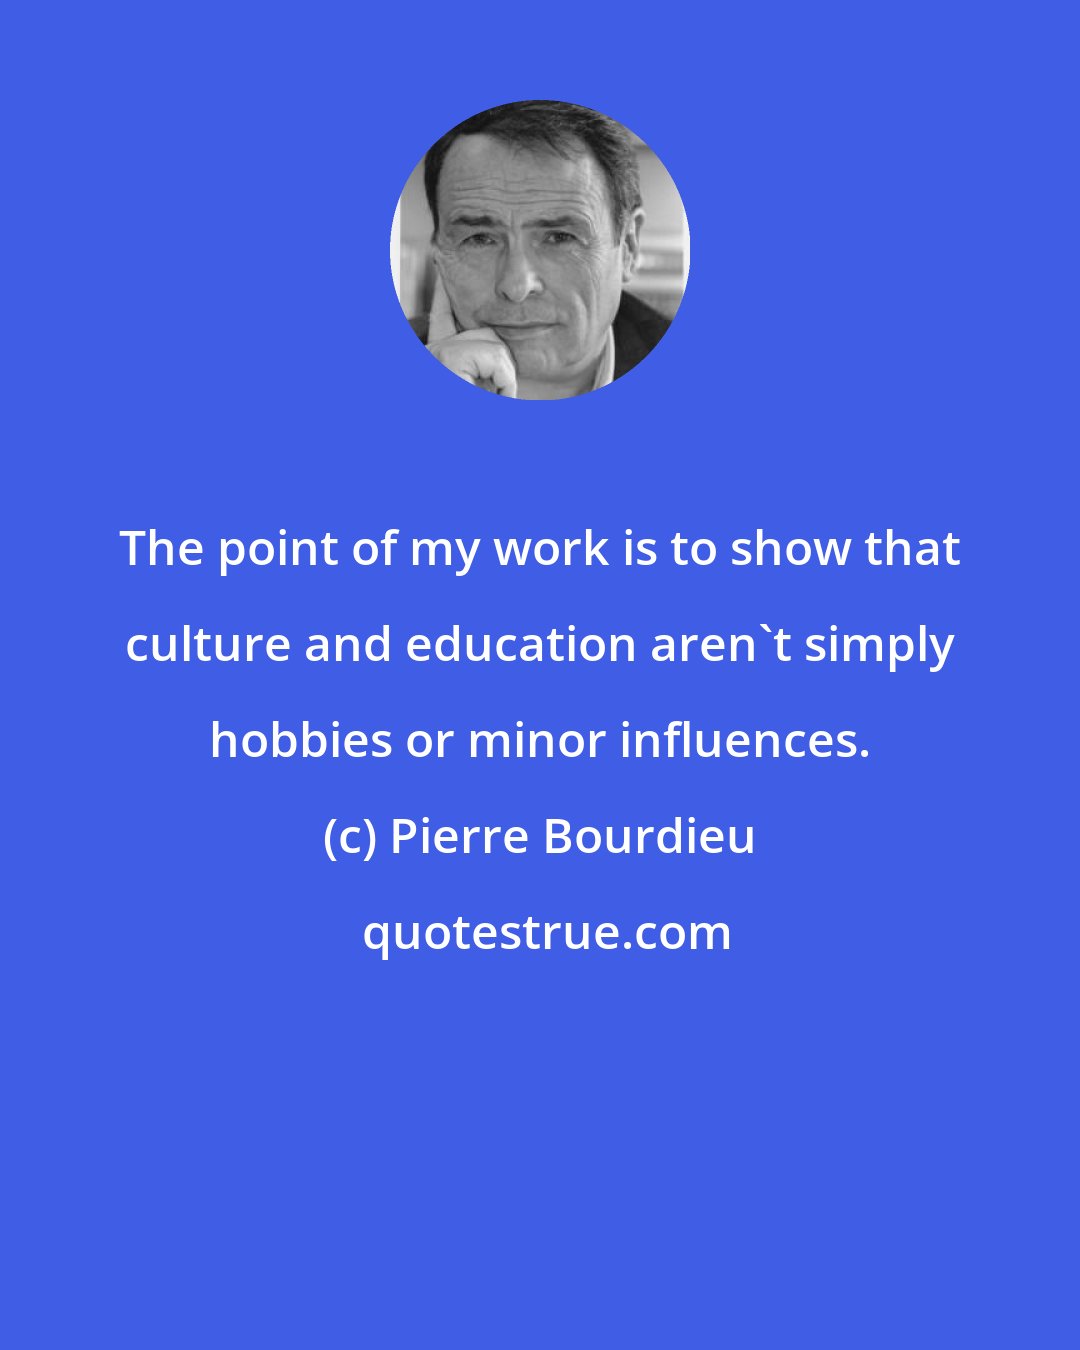 Pierre Bourdieu: The point of my work is to show that culture and education aren't simply hobbies or minor influences.